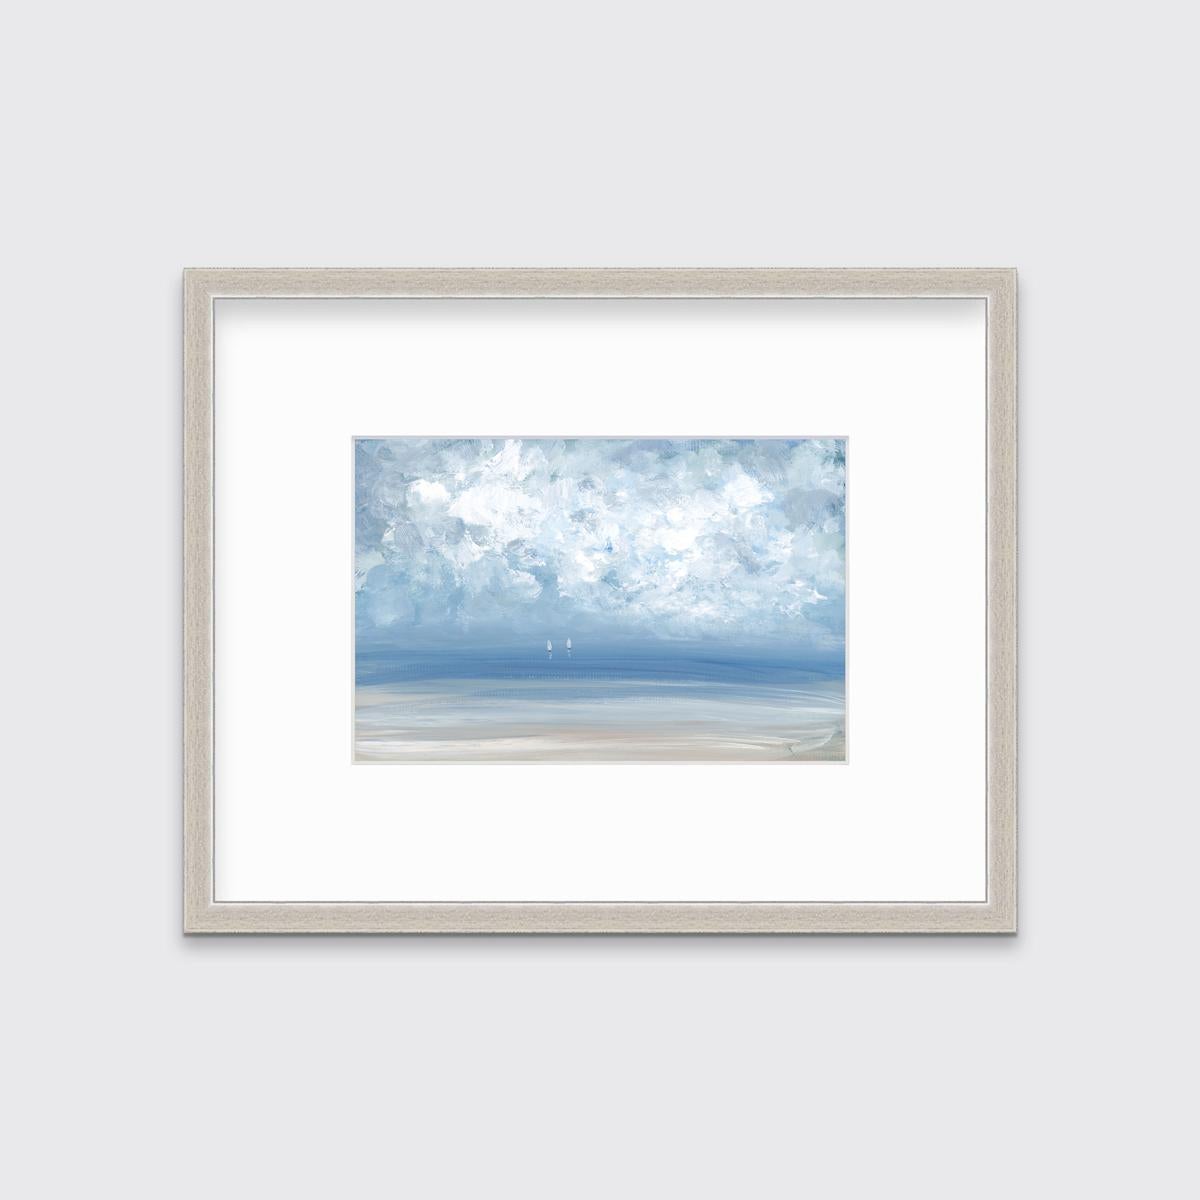 S. Cora Aldo Landscape Print - "High Clouds, " Framed Limited Edition Giclee Print, 10" x 15"